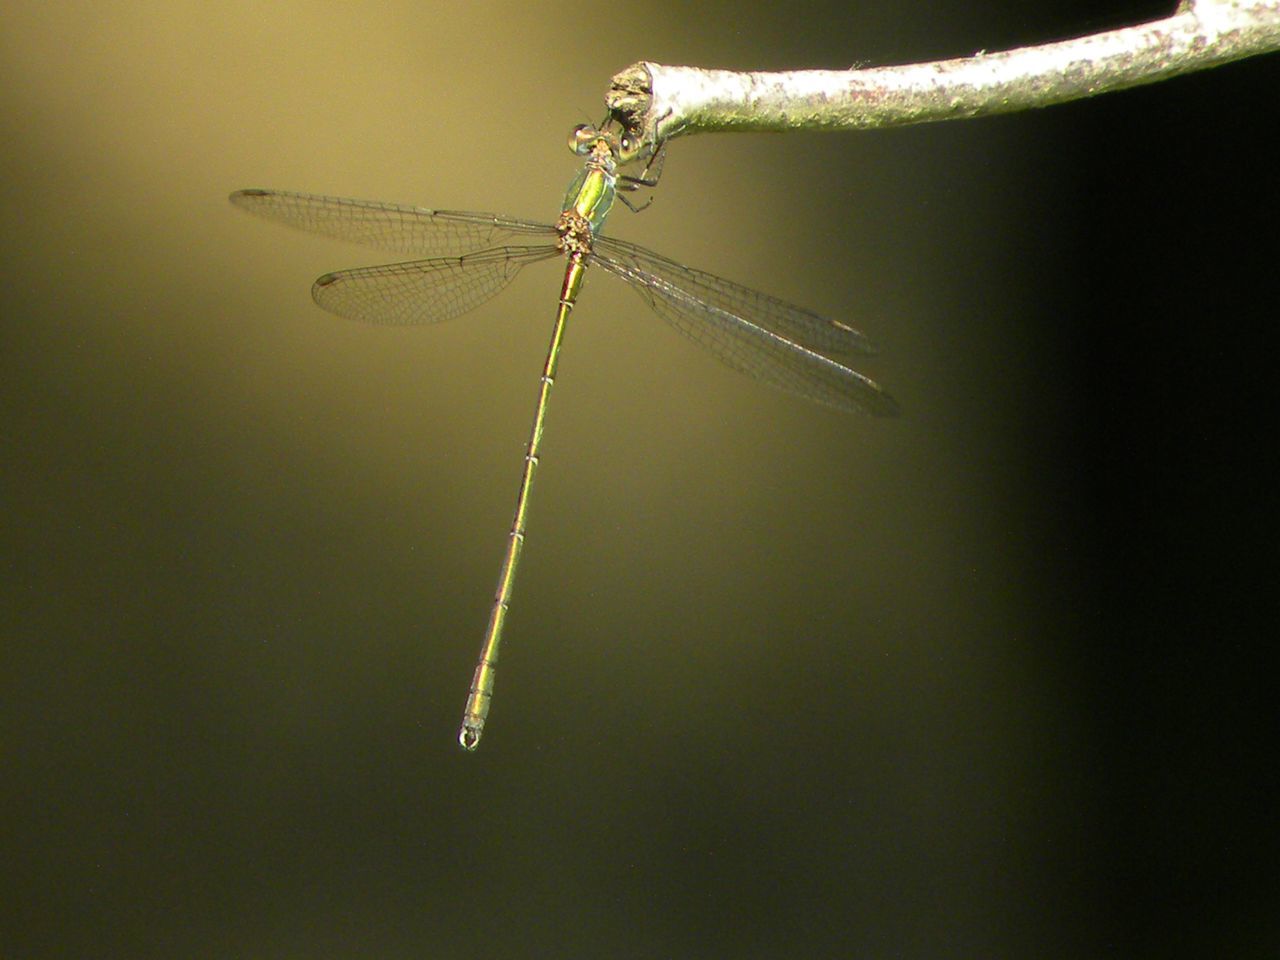 CLOSE-UP OF DRAGONFLY FLYING IN A GREEN LEAF